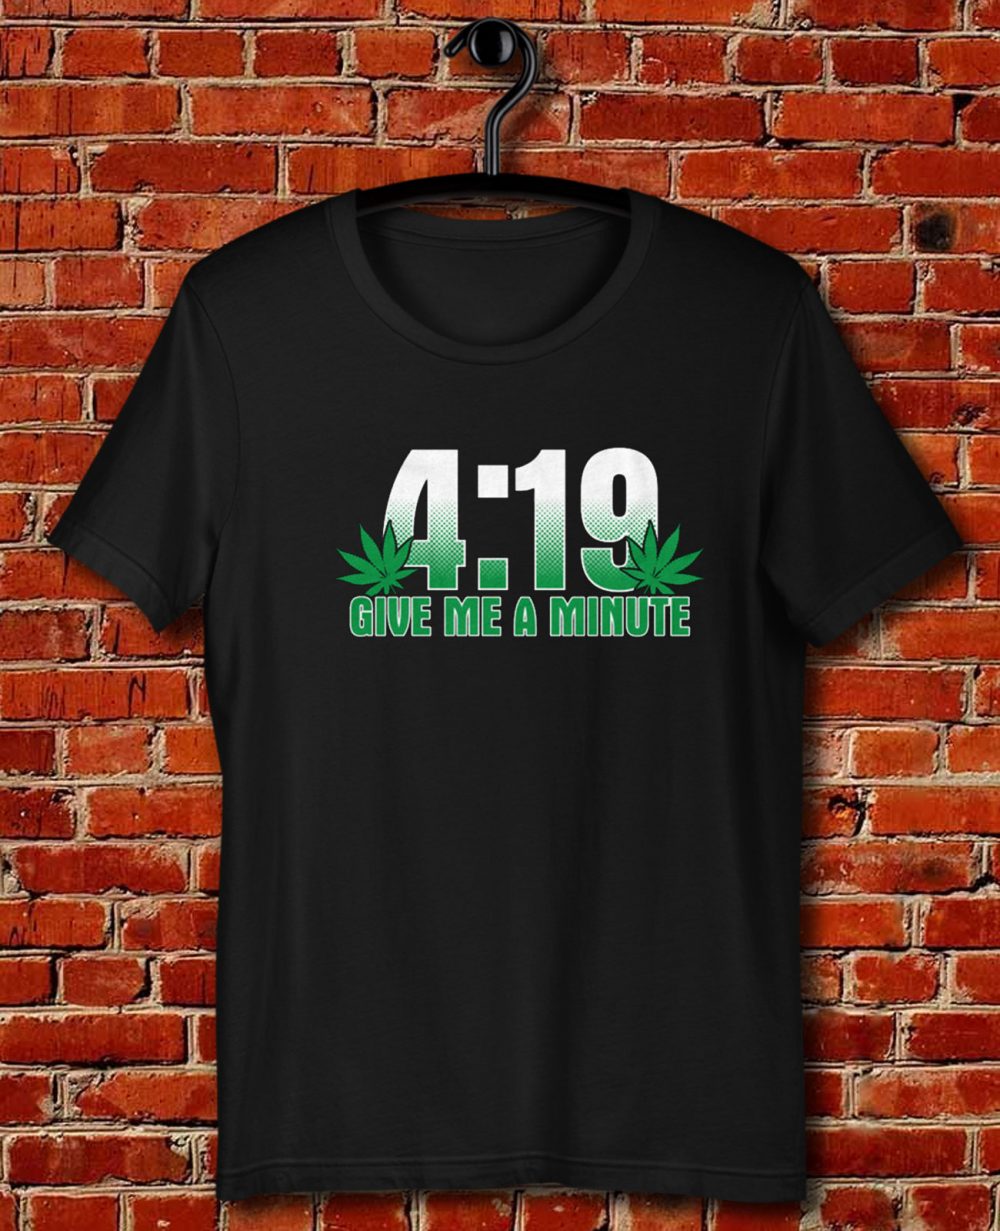 4 19 Give Me A Minute 420 Pot Head Stoner Smoker Kush Weed Quote Unisex T Shirt